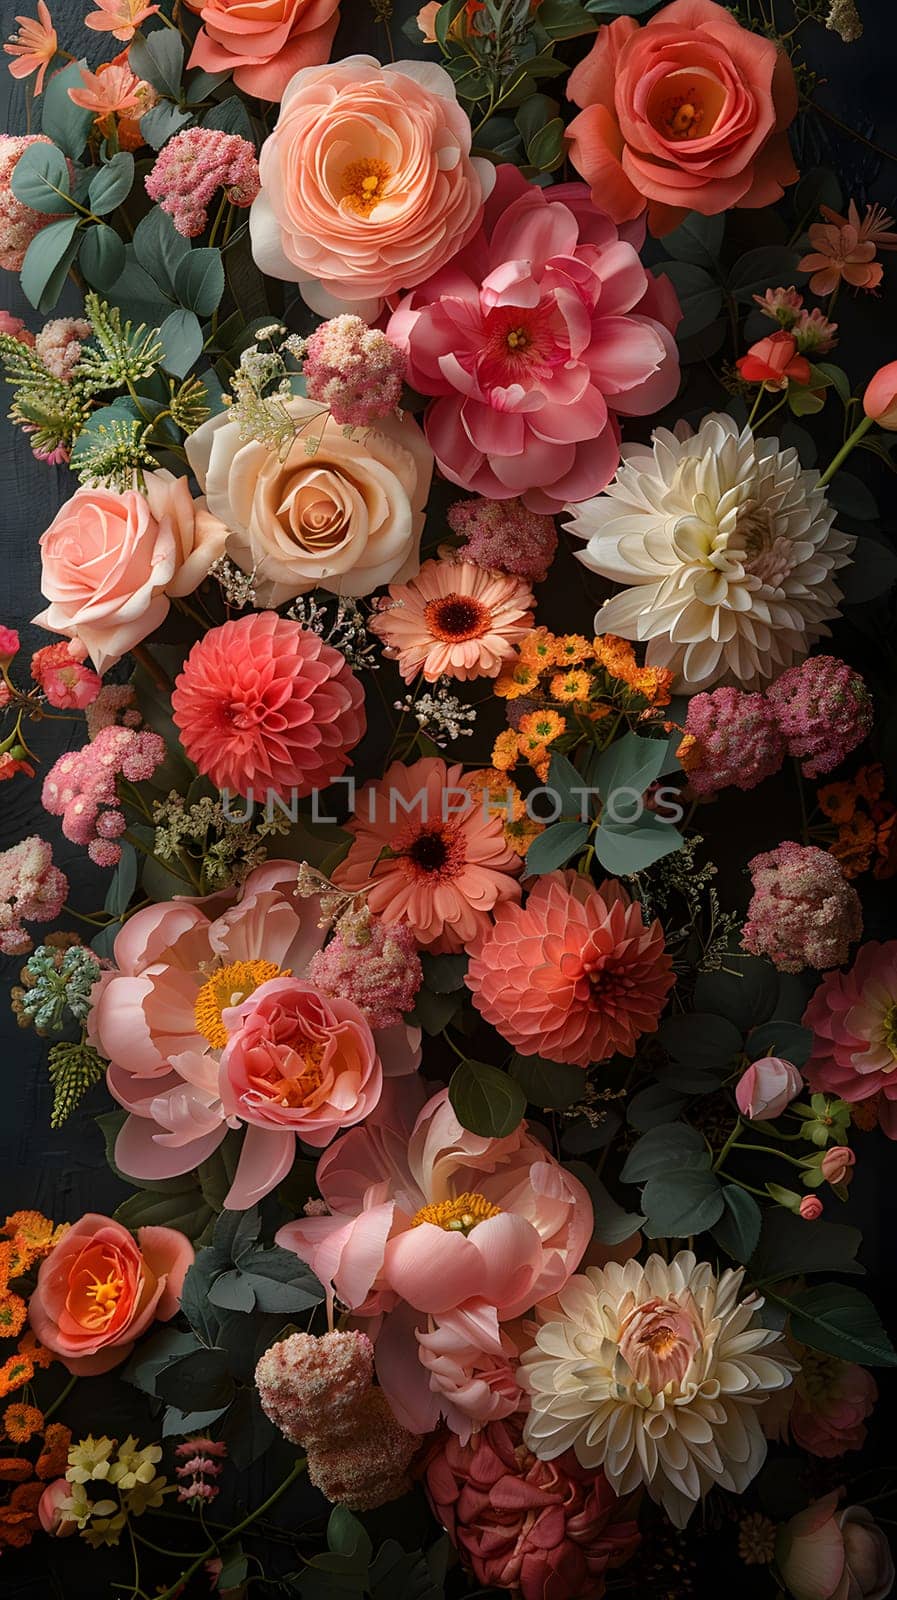 The picture showcases a variety of flowers, including hybrid tea roses in pink hues. These flowers can be used for flower arranging and creative arts to create stunning bouquets